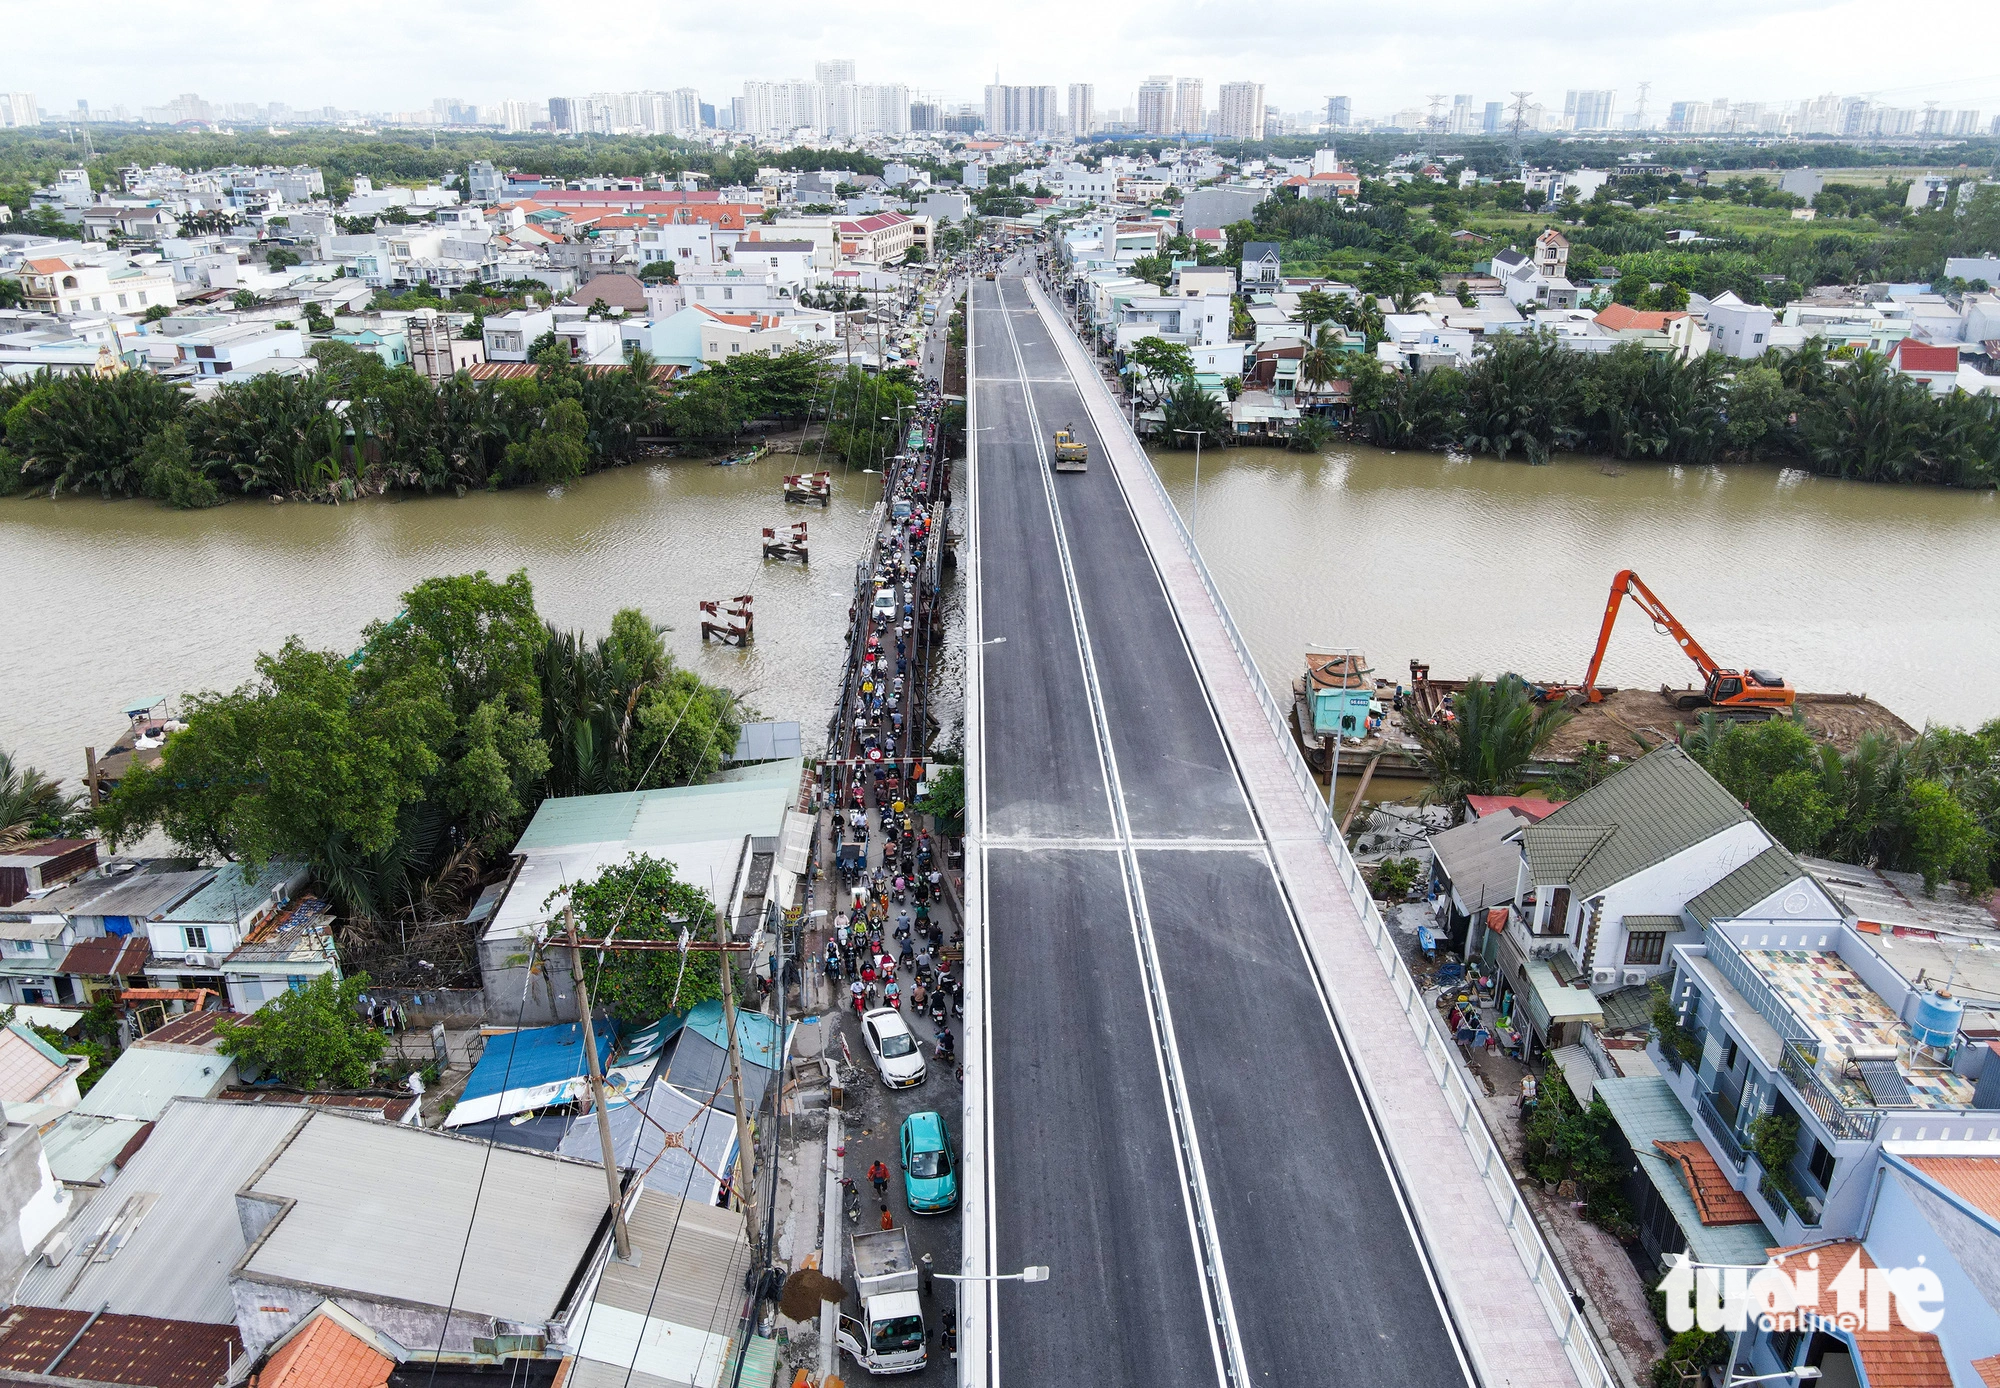 The new bridge will help revitalize the area and facilitate travel. Many local residents are excited as they will no longer have to pass over the deteriorated Long Kieng Bridge.